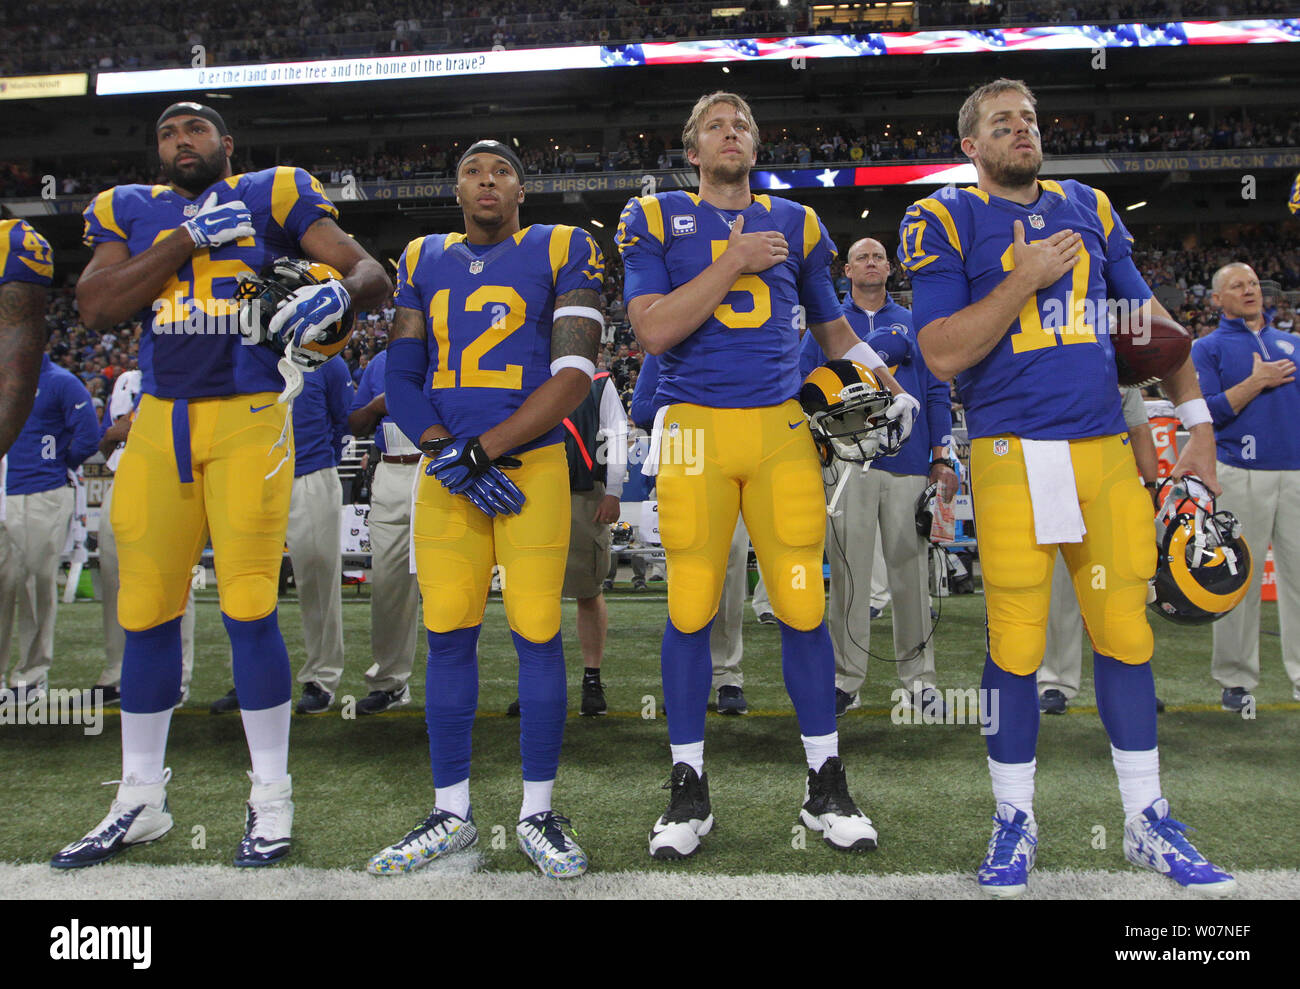 St. Louis Rams (L to R) Cory Harkey, Stedman Bailey, Nick Foles and Case Keenum stand for the National Anthem before a game against the San Francisco 49ers at the Edward Jones Dome in St. Louis on November 1, 2015.   Photo by Bill Greenblatt/UPI Stock Photo